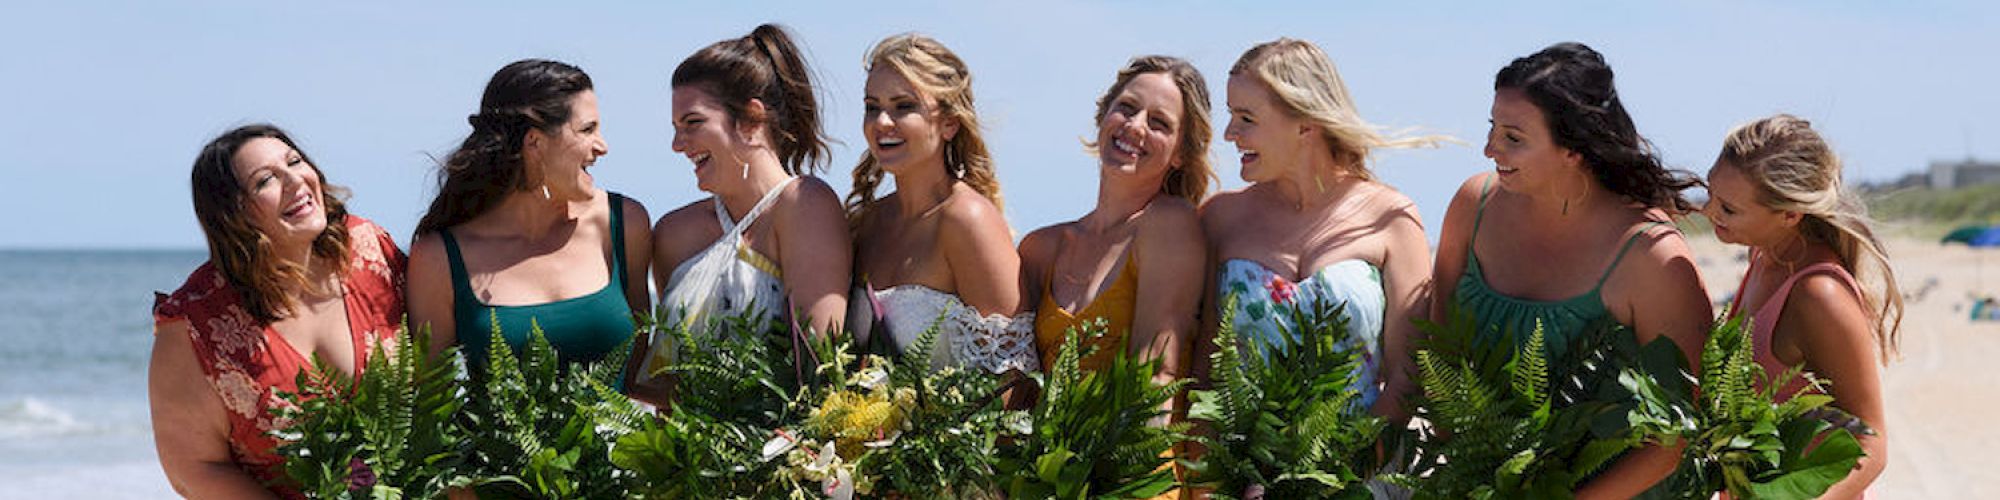 A group of women in colorful dresses holding bouquets, standing together on a beach with the ocean in the background.